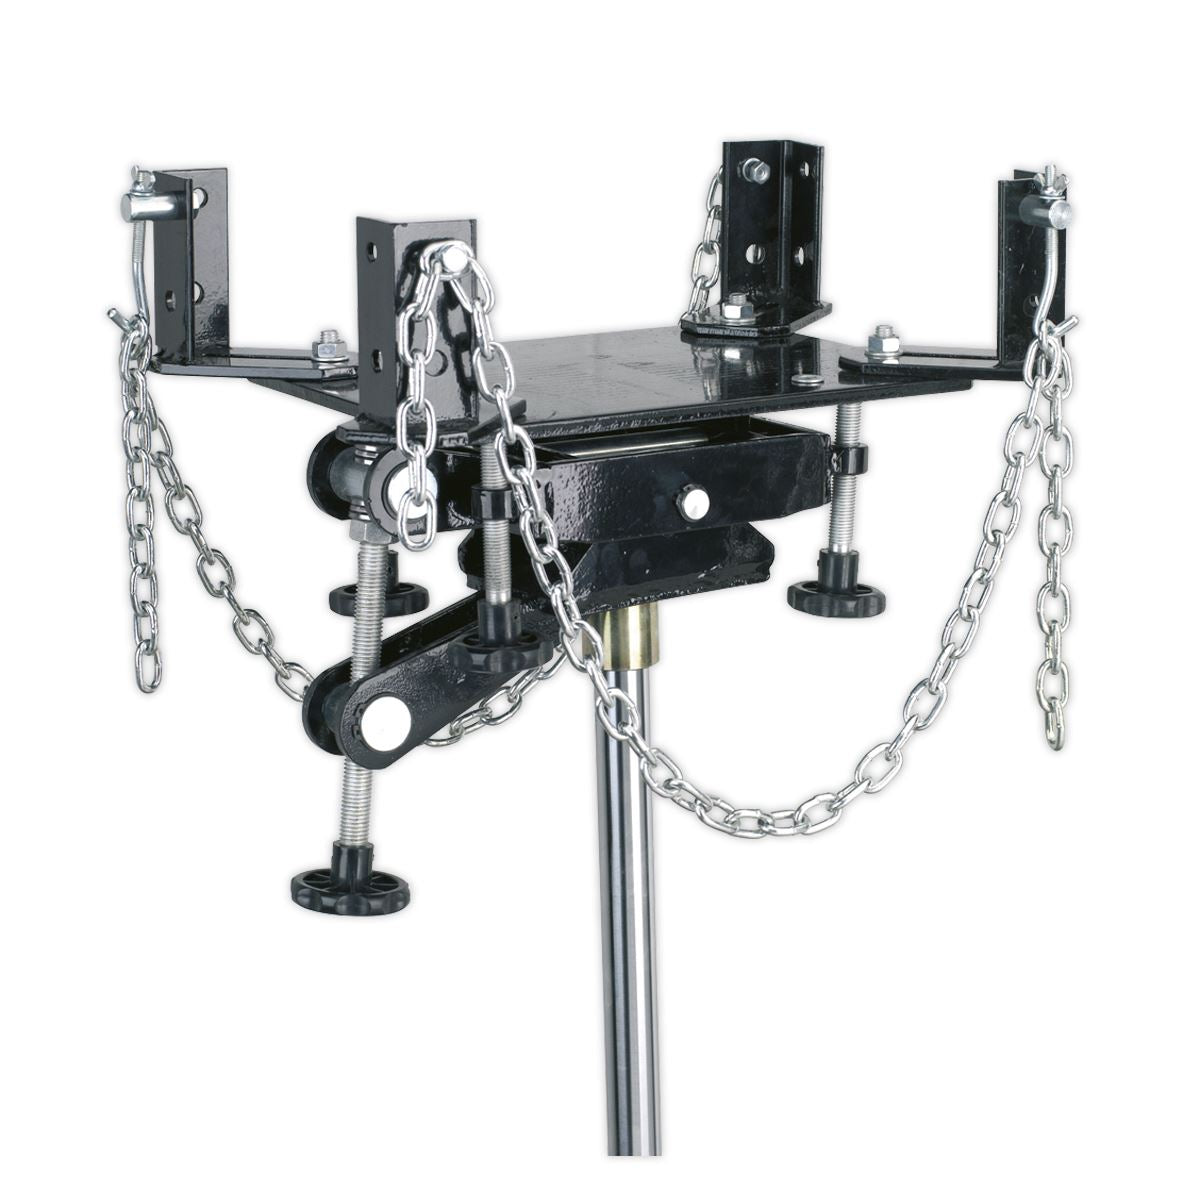 Sealey Adjustable Gearbox Support 1000kg Capacity